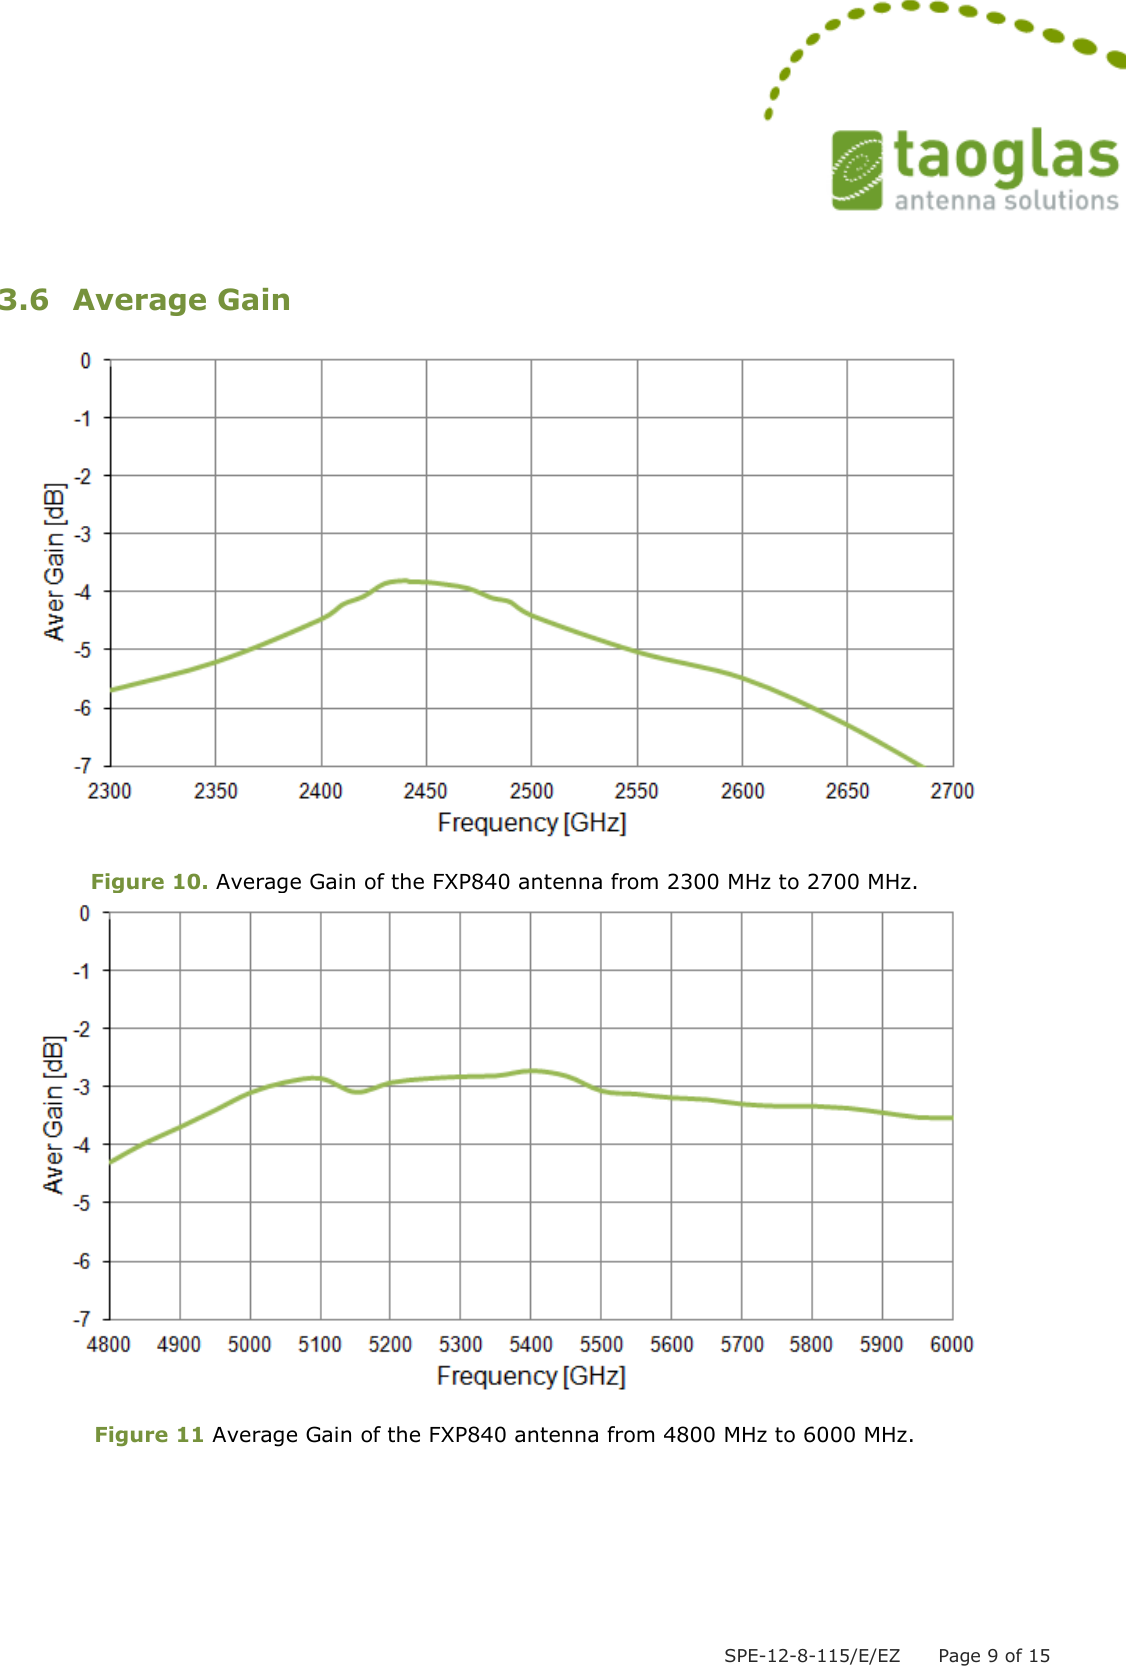  SPE-12-8-115/E/EZ      Page 9 of 15  3.6 Average Gain   Figure 10. Average Gain of the FXP840 antenna from 2300 MHz to 2700 MHz.   Figure 11 Average Gain of the FXP840 antenna from 4800 MHz to 6000 MHz.      